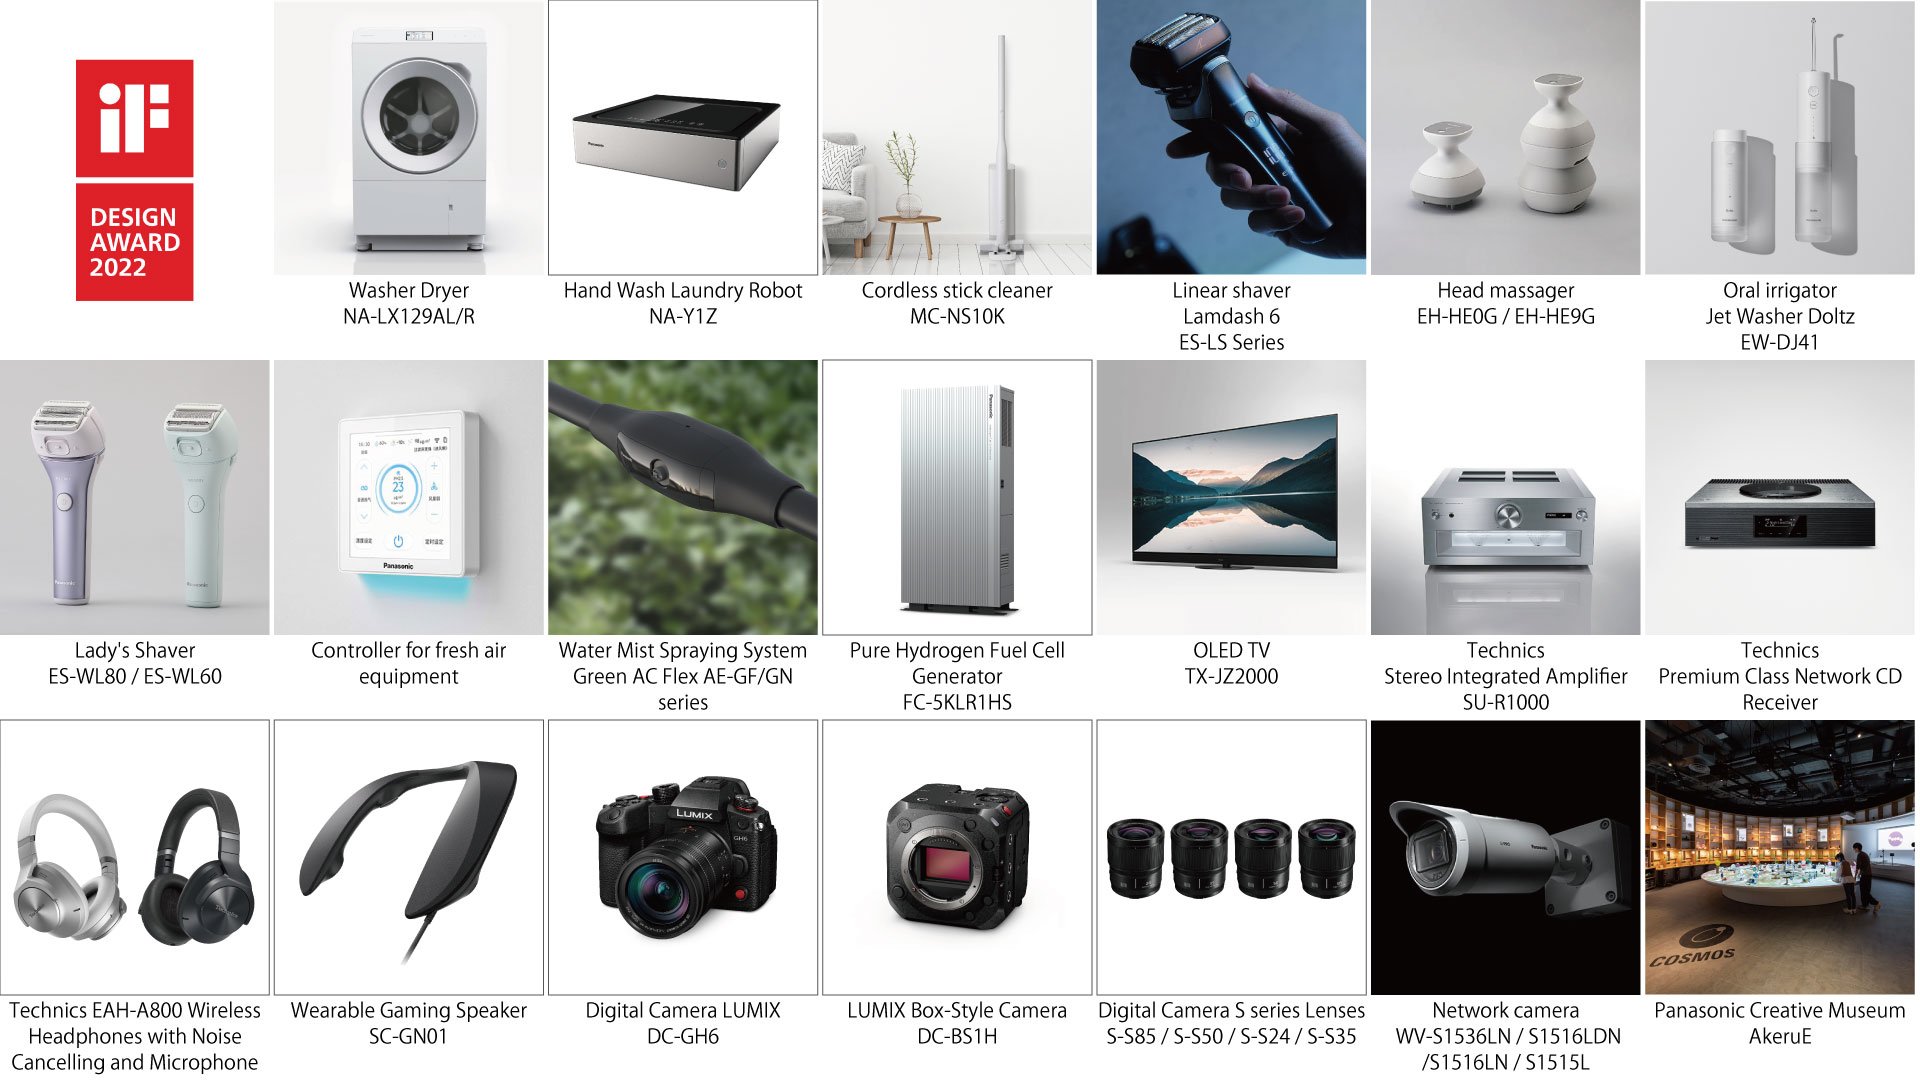 Photo: Twenty products that received the iF DESIGN AWARD 2022.